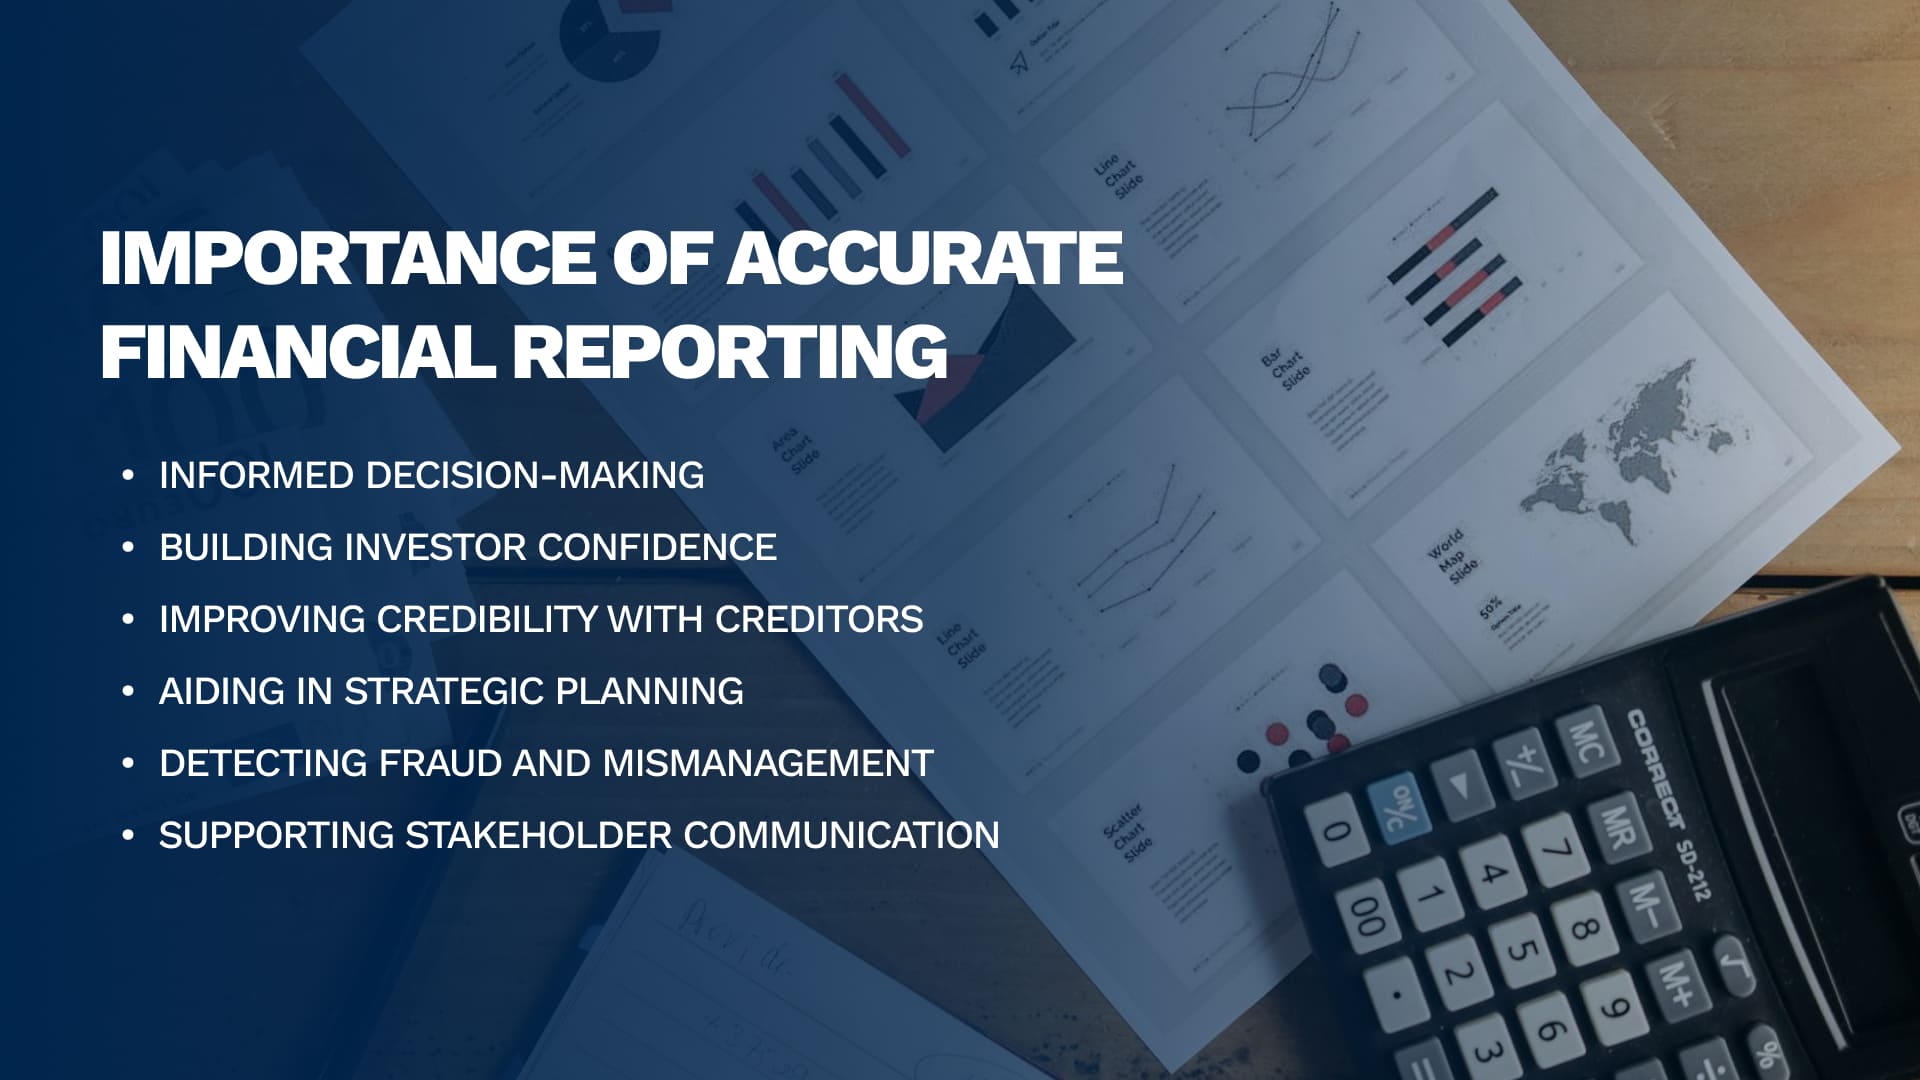 Importance of Accurate Financial Reporting